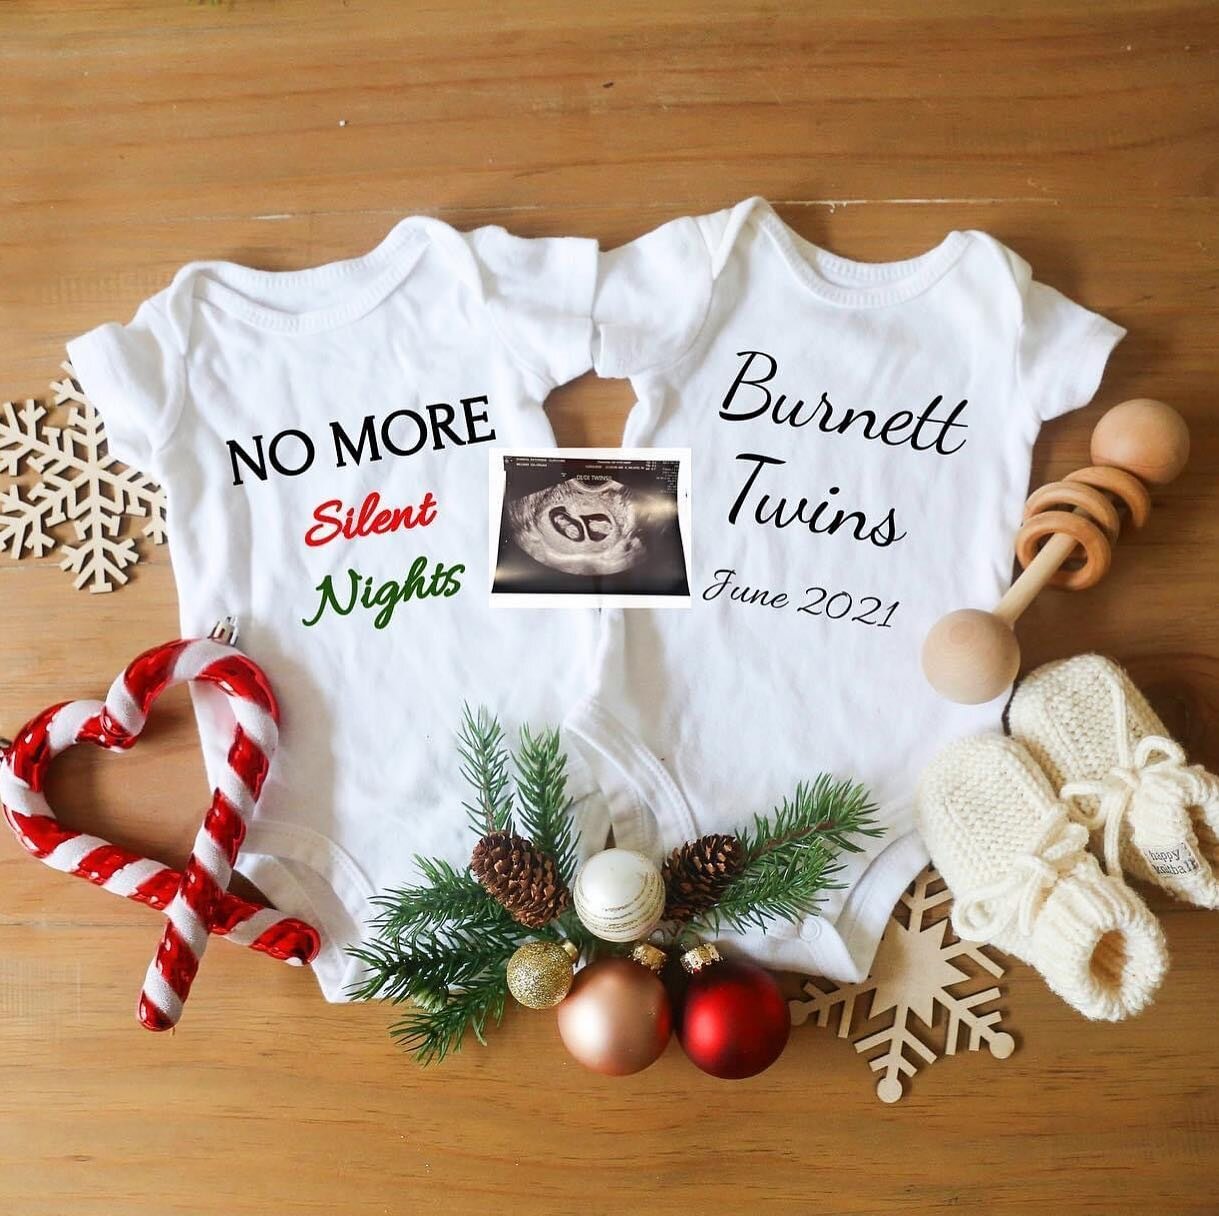 Santa had a BIG surprise in store for the Shanta/Burnett family this Christmas!! 👶👶 TWINS are on the way for my little sis and brother-in-law , so excited and happy for them 💜🎄
.
.
.
.
#twins #twinstagram #twinpregnancy #twinning #themorethemerri